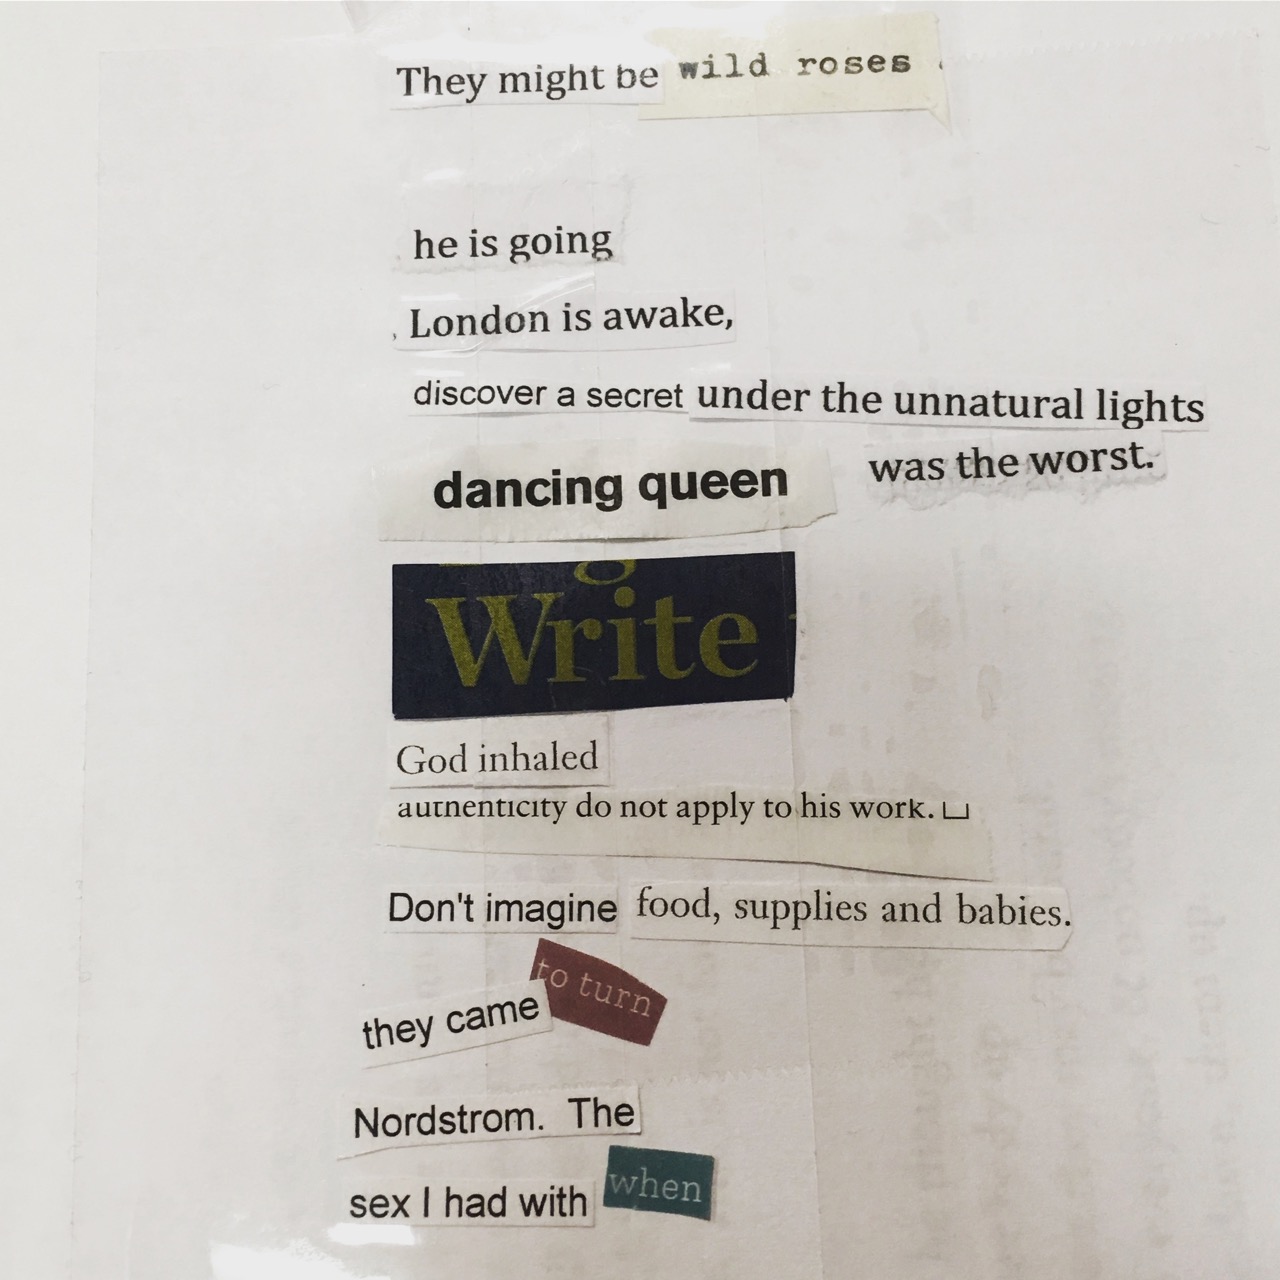 Original cut-up form of the poem They Might Be Wild Roses made of cut out workds from a magazine pasted to a piece of paper